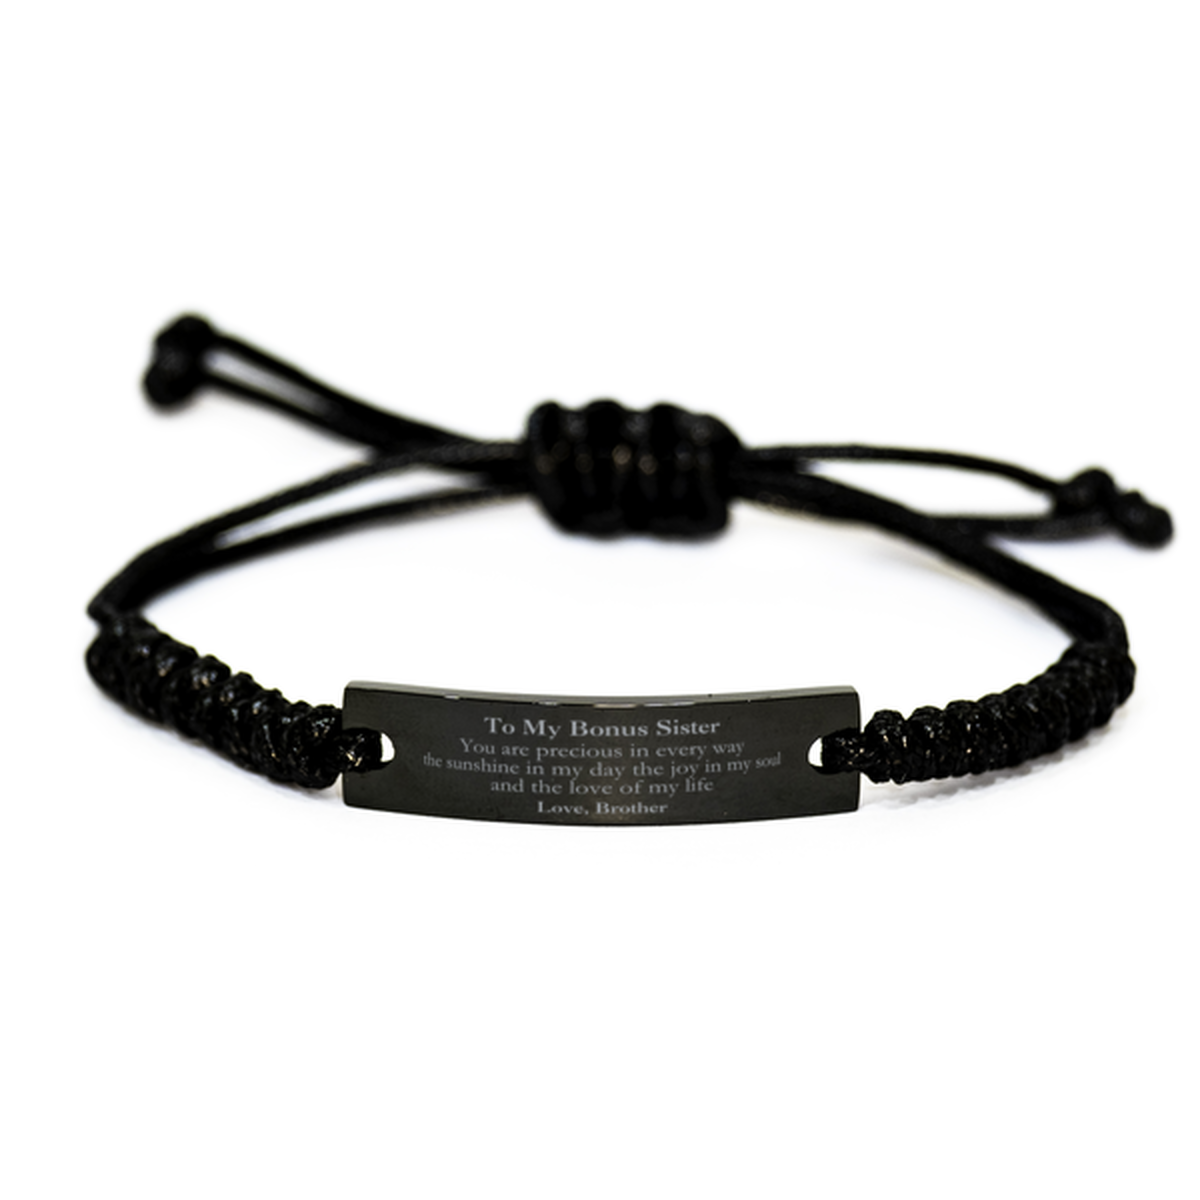 Graduation Gifts for Bonus Sister Black Rope Bracelet Present from Brother, Christmas Bonus Sister Birthday Gifts Bonus Sister You are precious in every way the sunshine in my day. Love, Brother